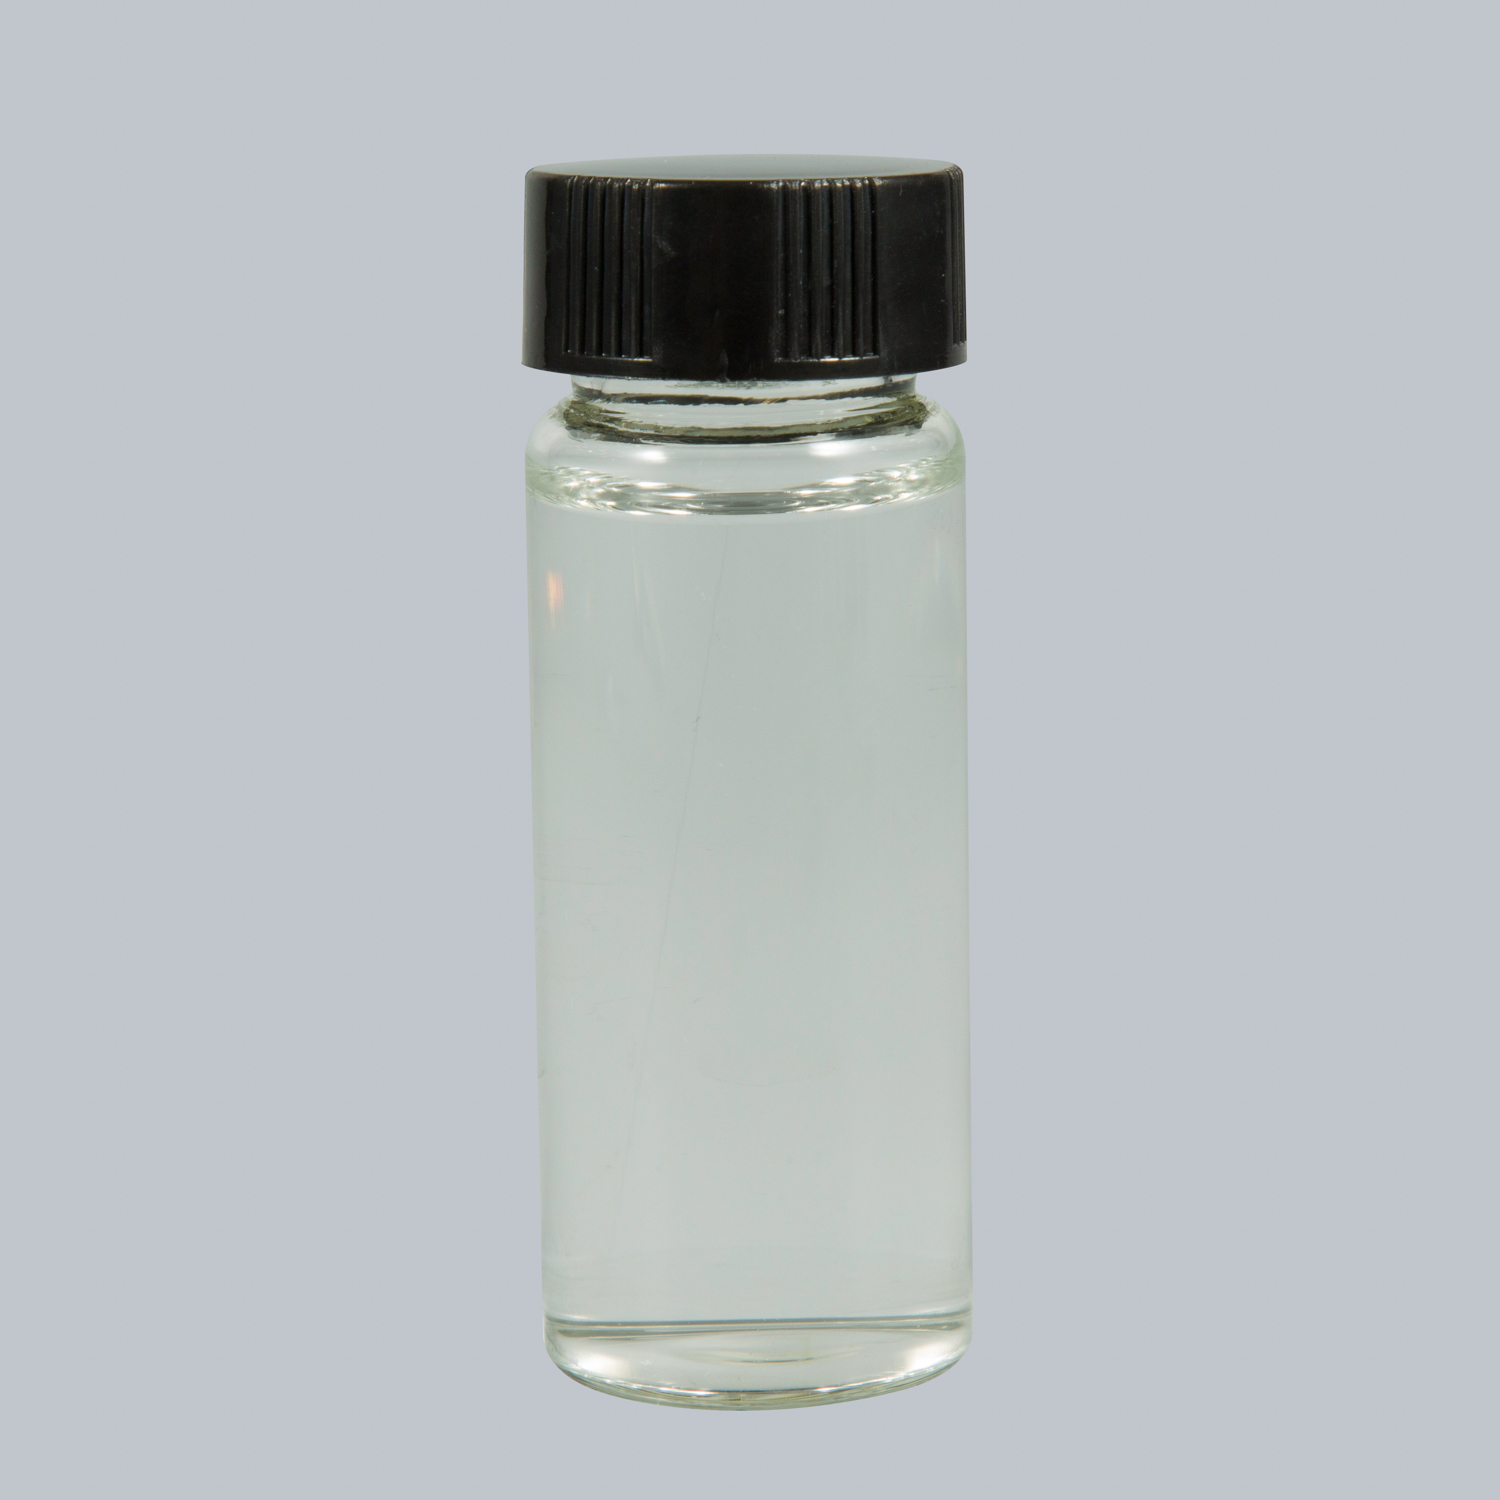 China Supplier 2,4-Dichloroacetophenone - 2,6-Difluorotoluene Manufacturer/High quality/Best price/In stock Cas No: 443-84-5 – Mit-ivy